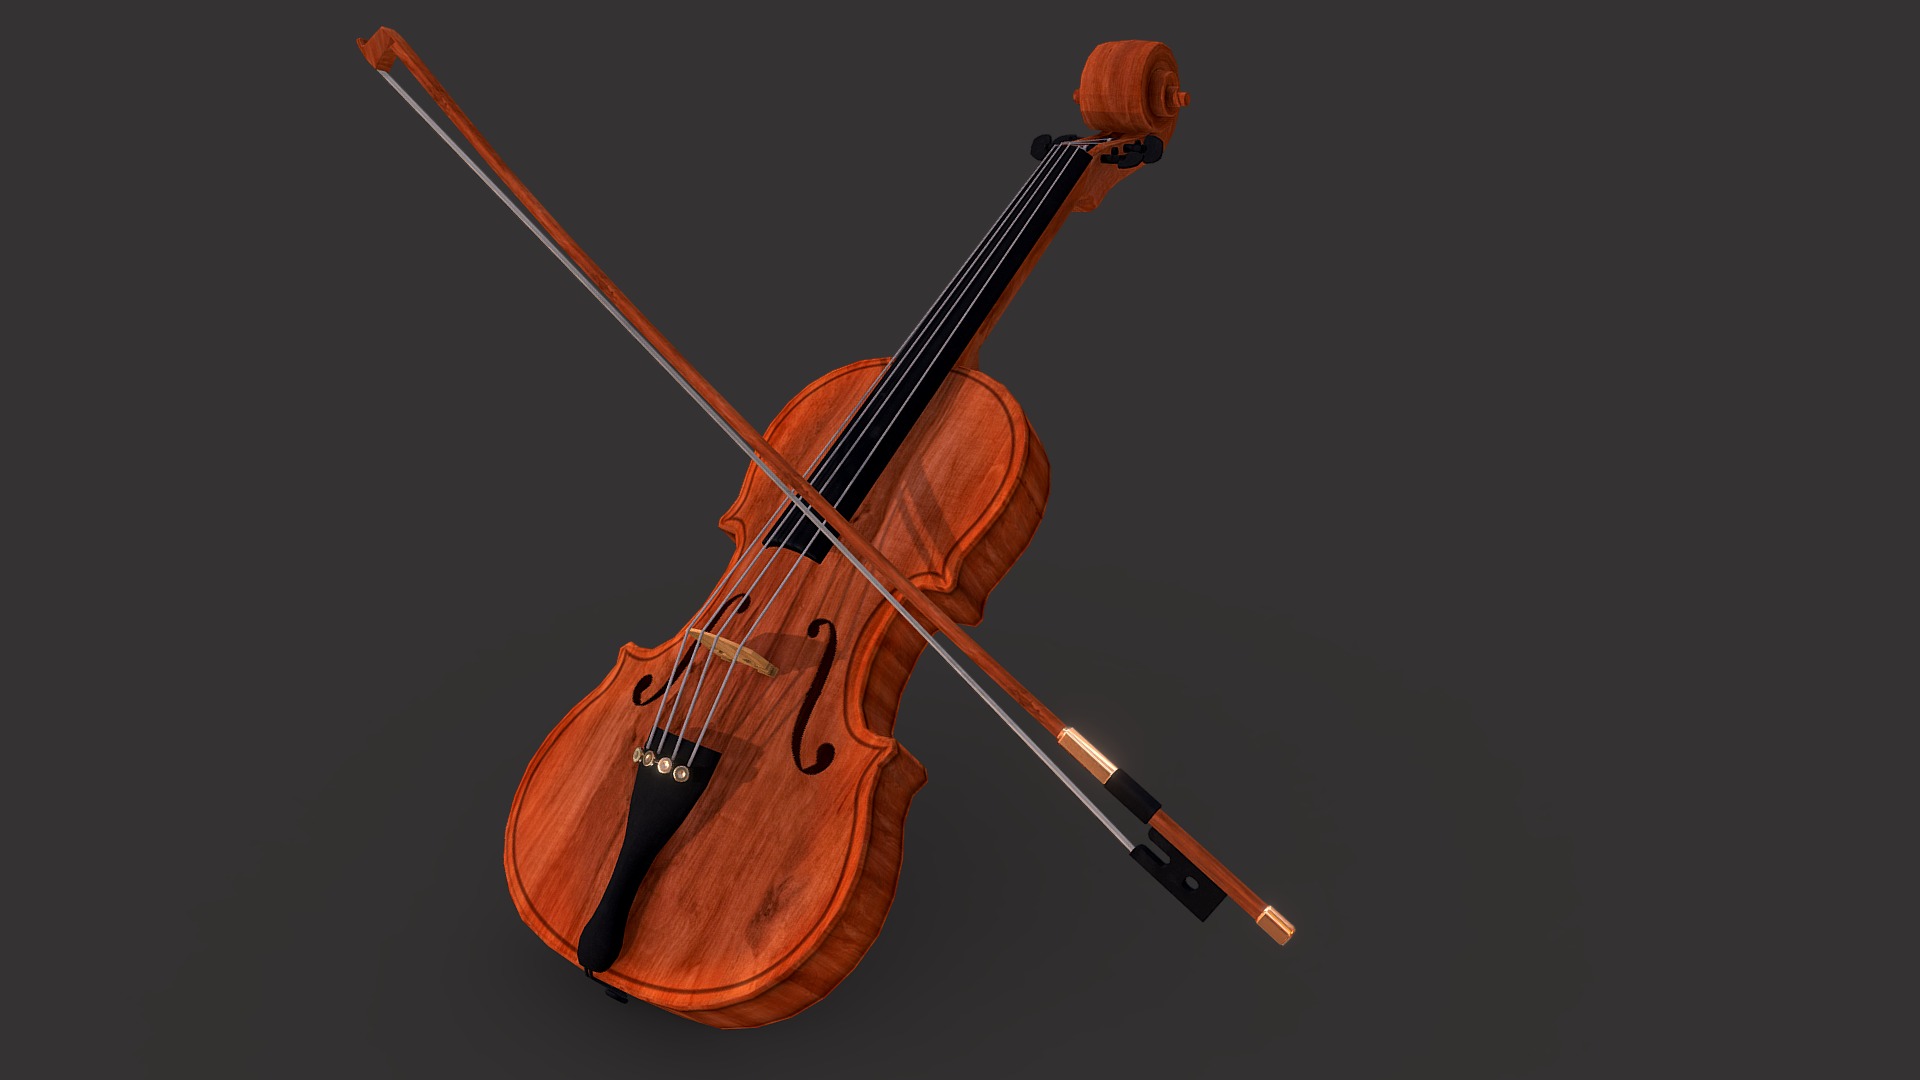 3D model Violin – Game Asset - This is a 3D model of the Violin - Game Asset. The 3D model is about a violin on a black background.